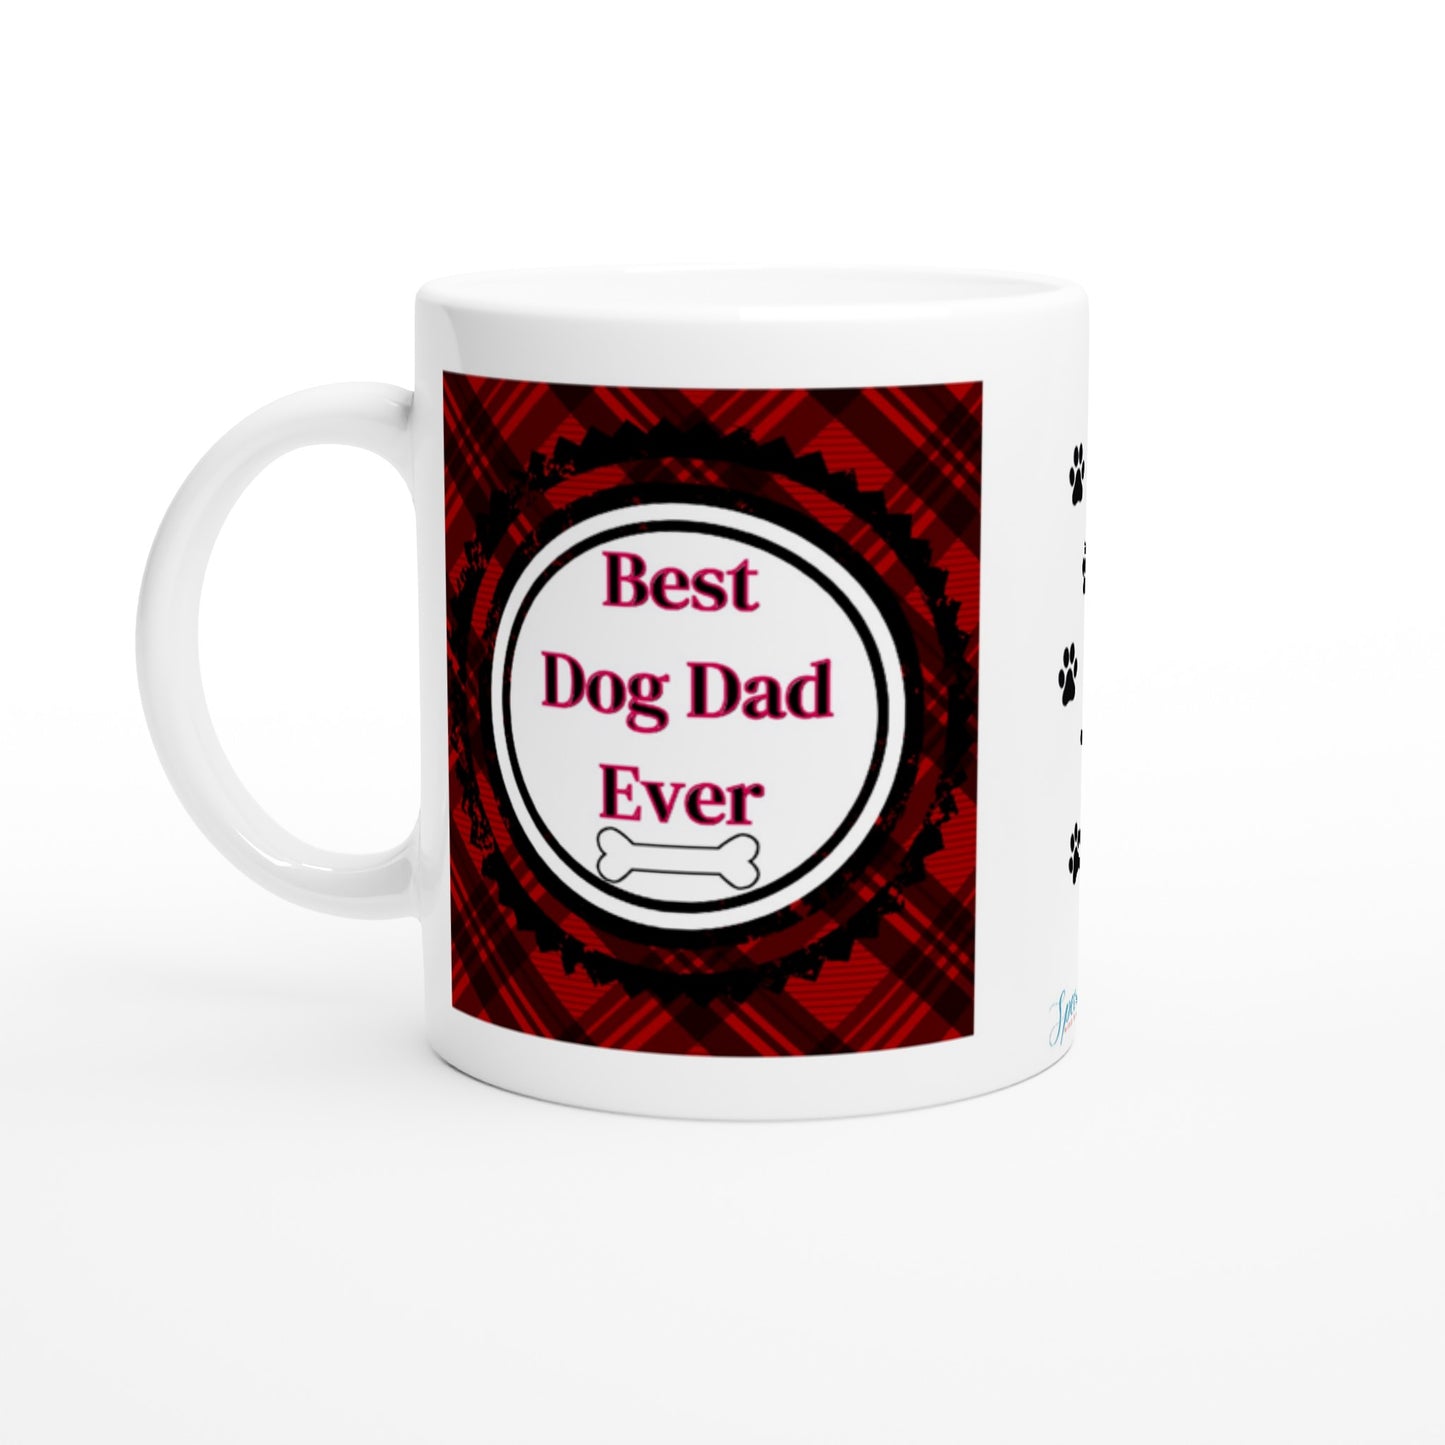 "Best Dog Dad Ever" Customizable Photo & Name Mug 11 oz. front view